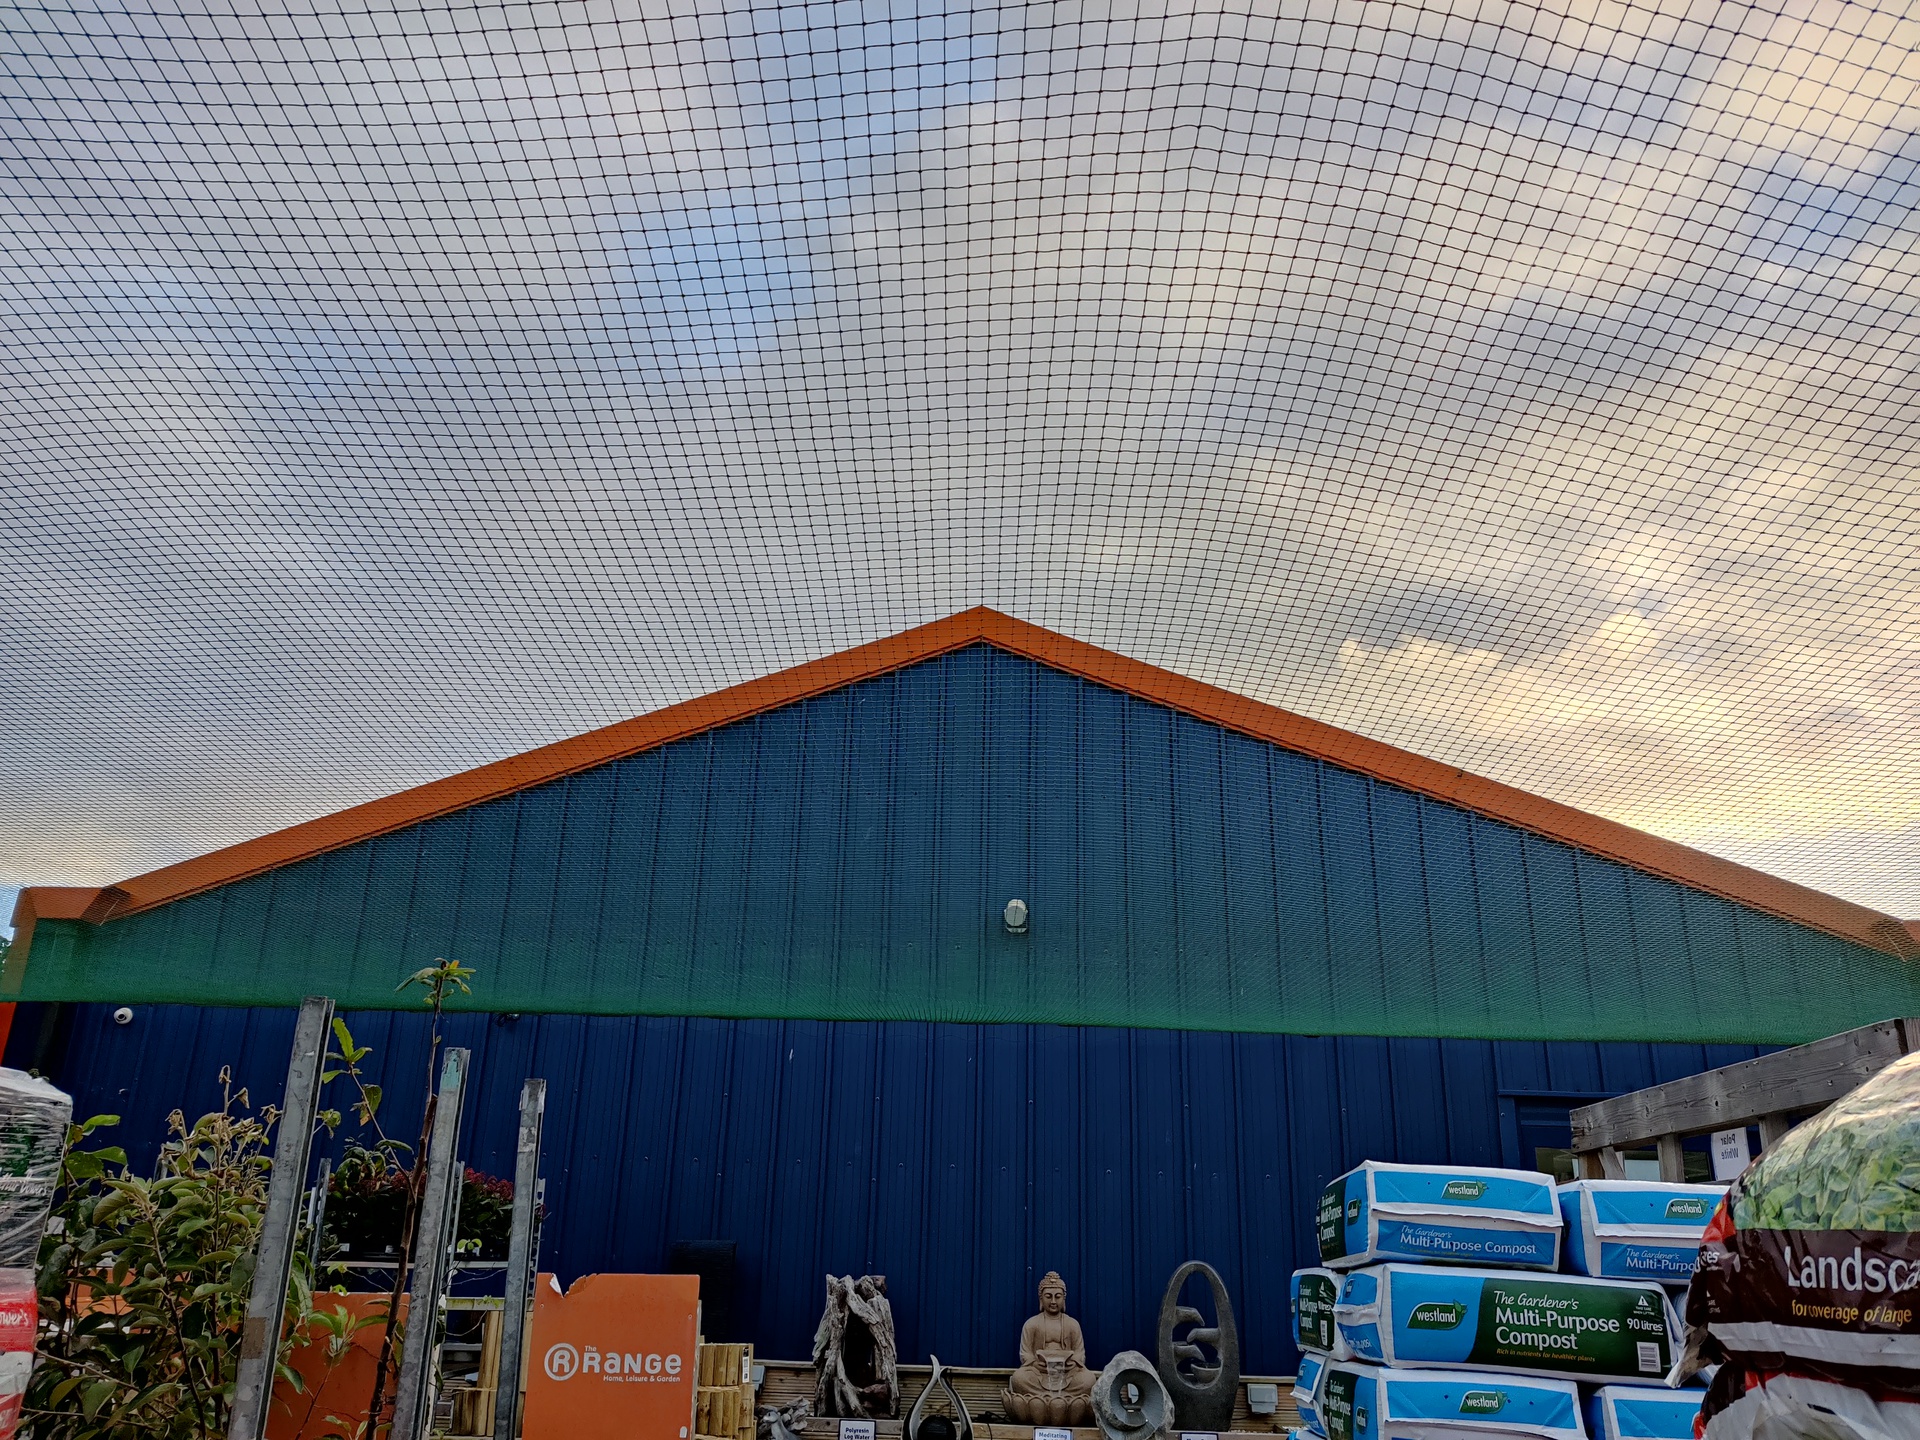 OnePlus 8T camera sample of netting above a garden center